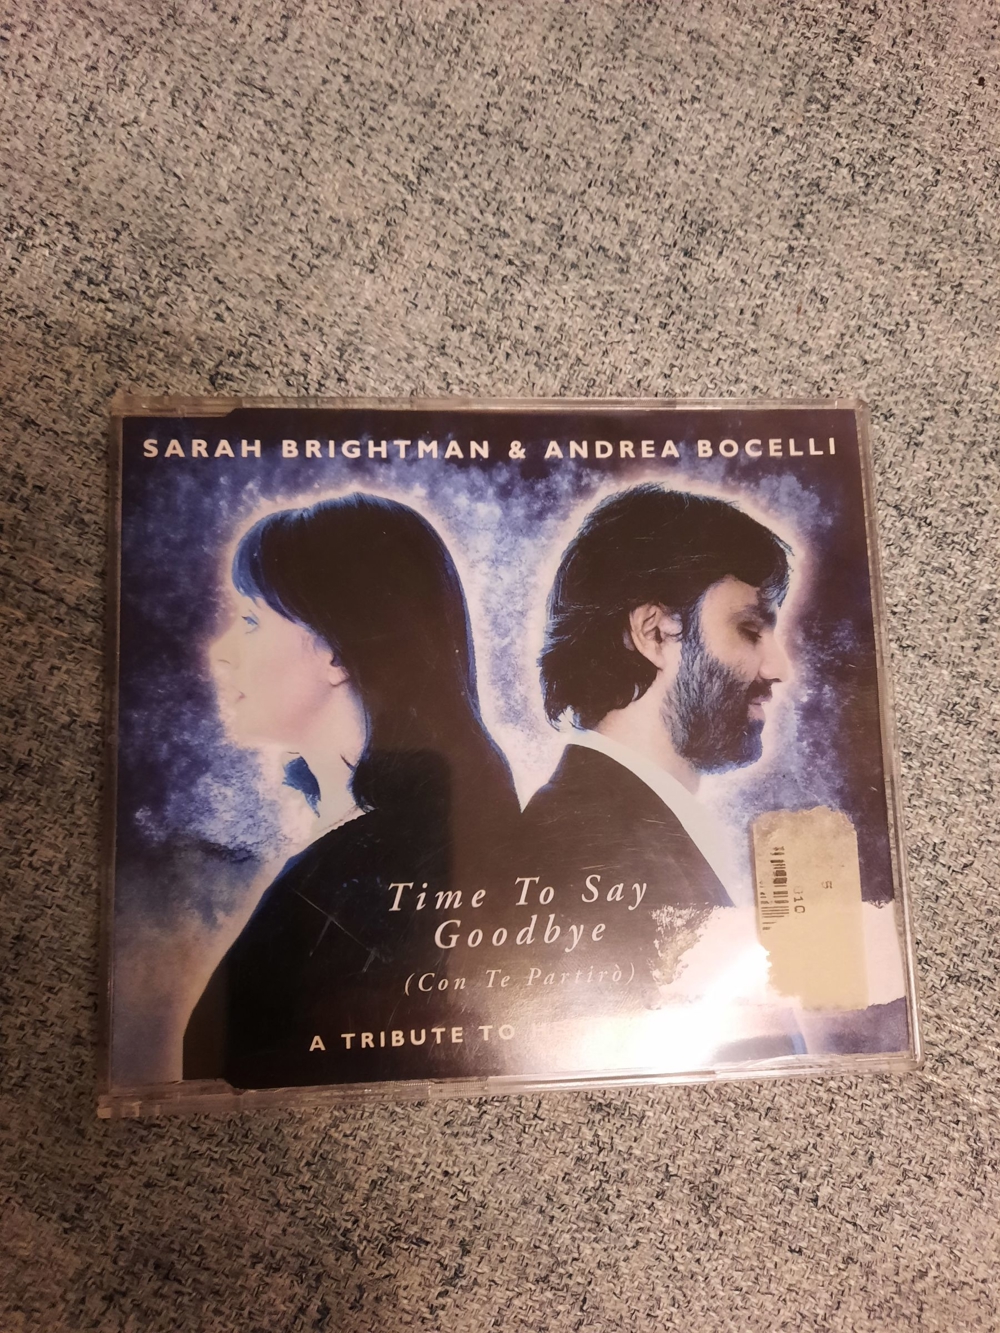 Maxi-Single CD "A. Bocelli & S. Brightman - Time To Say Goodbye"